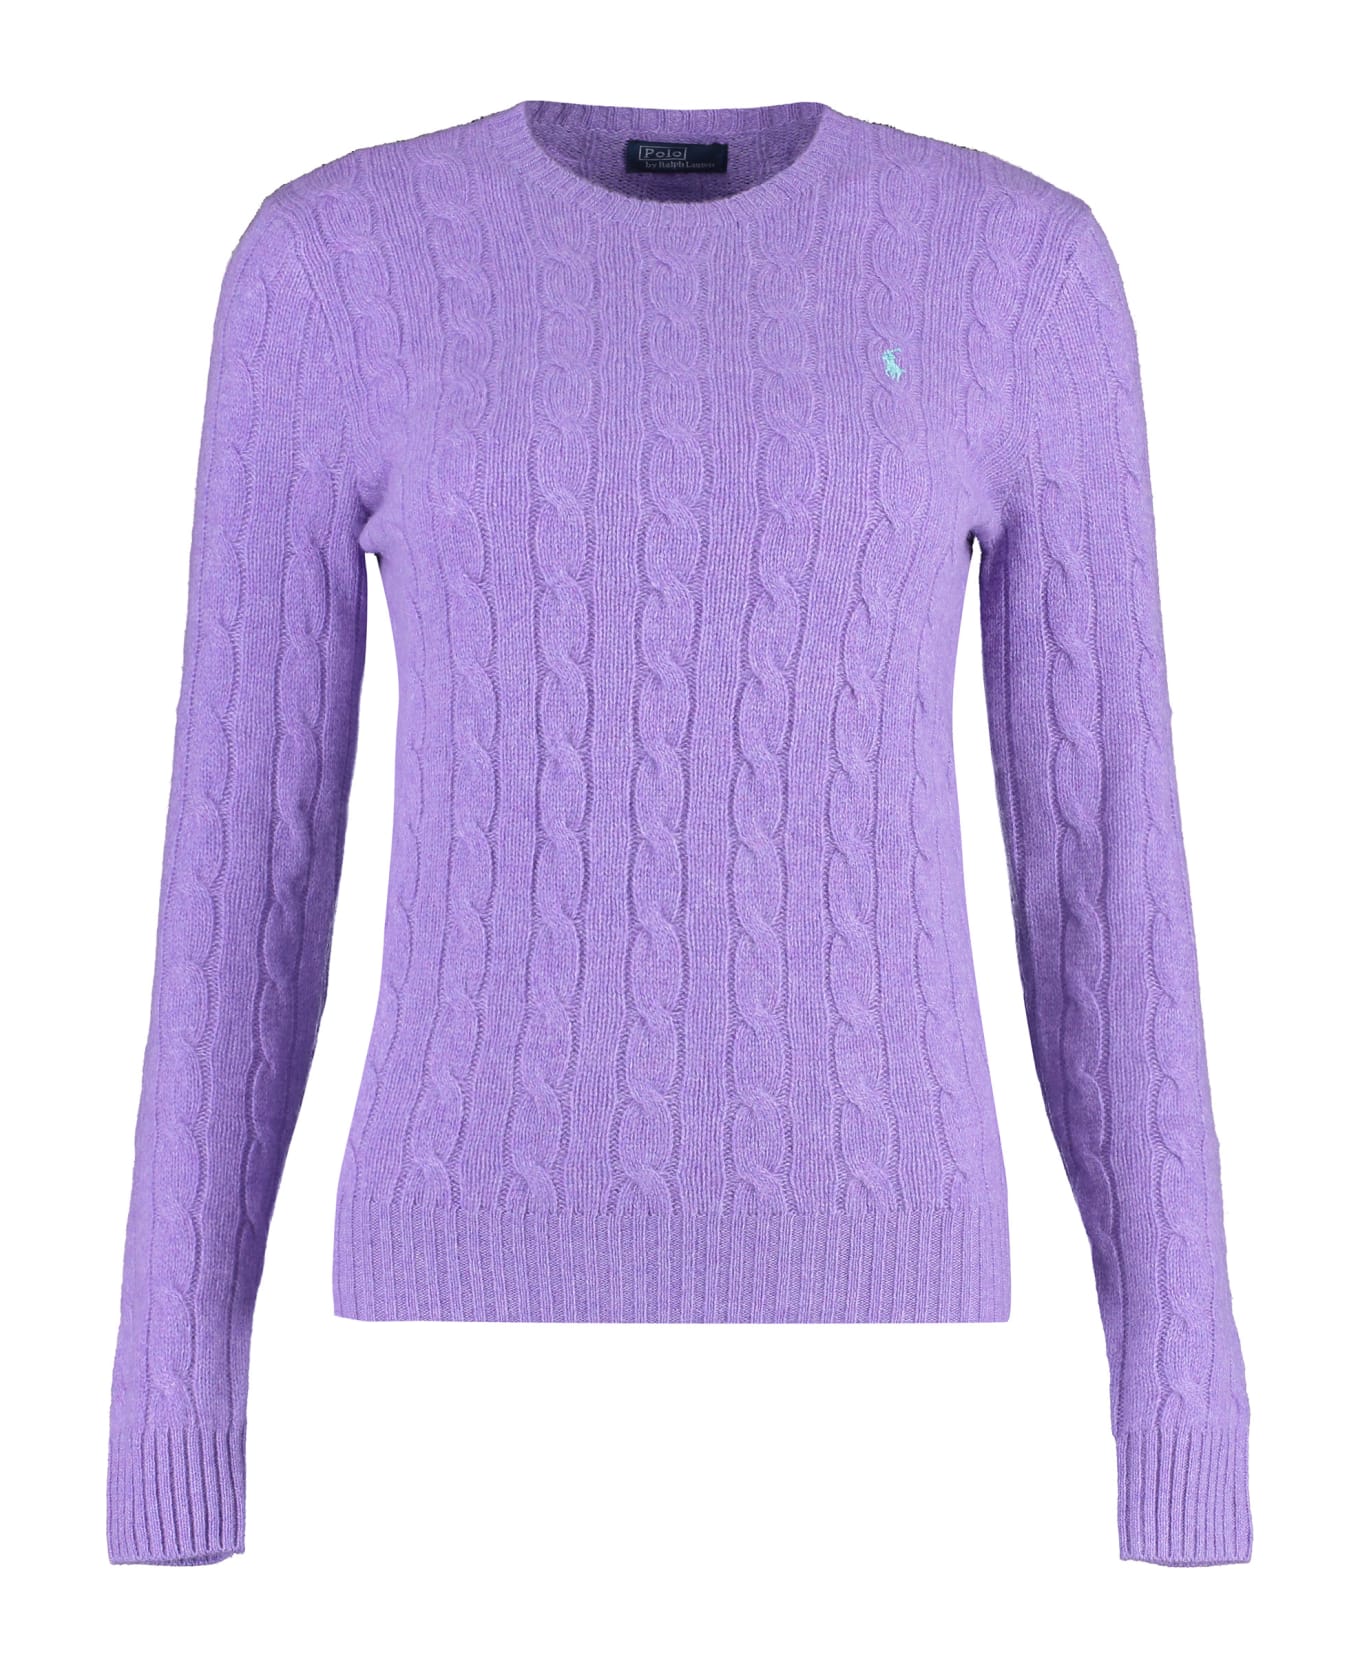 Polo Ralph Lauren Wool And Cashmere Blend Pullover - Purple ニットウェア